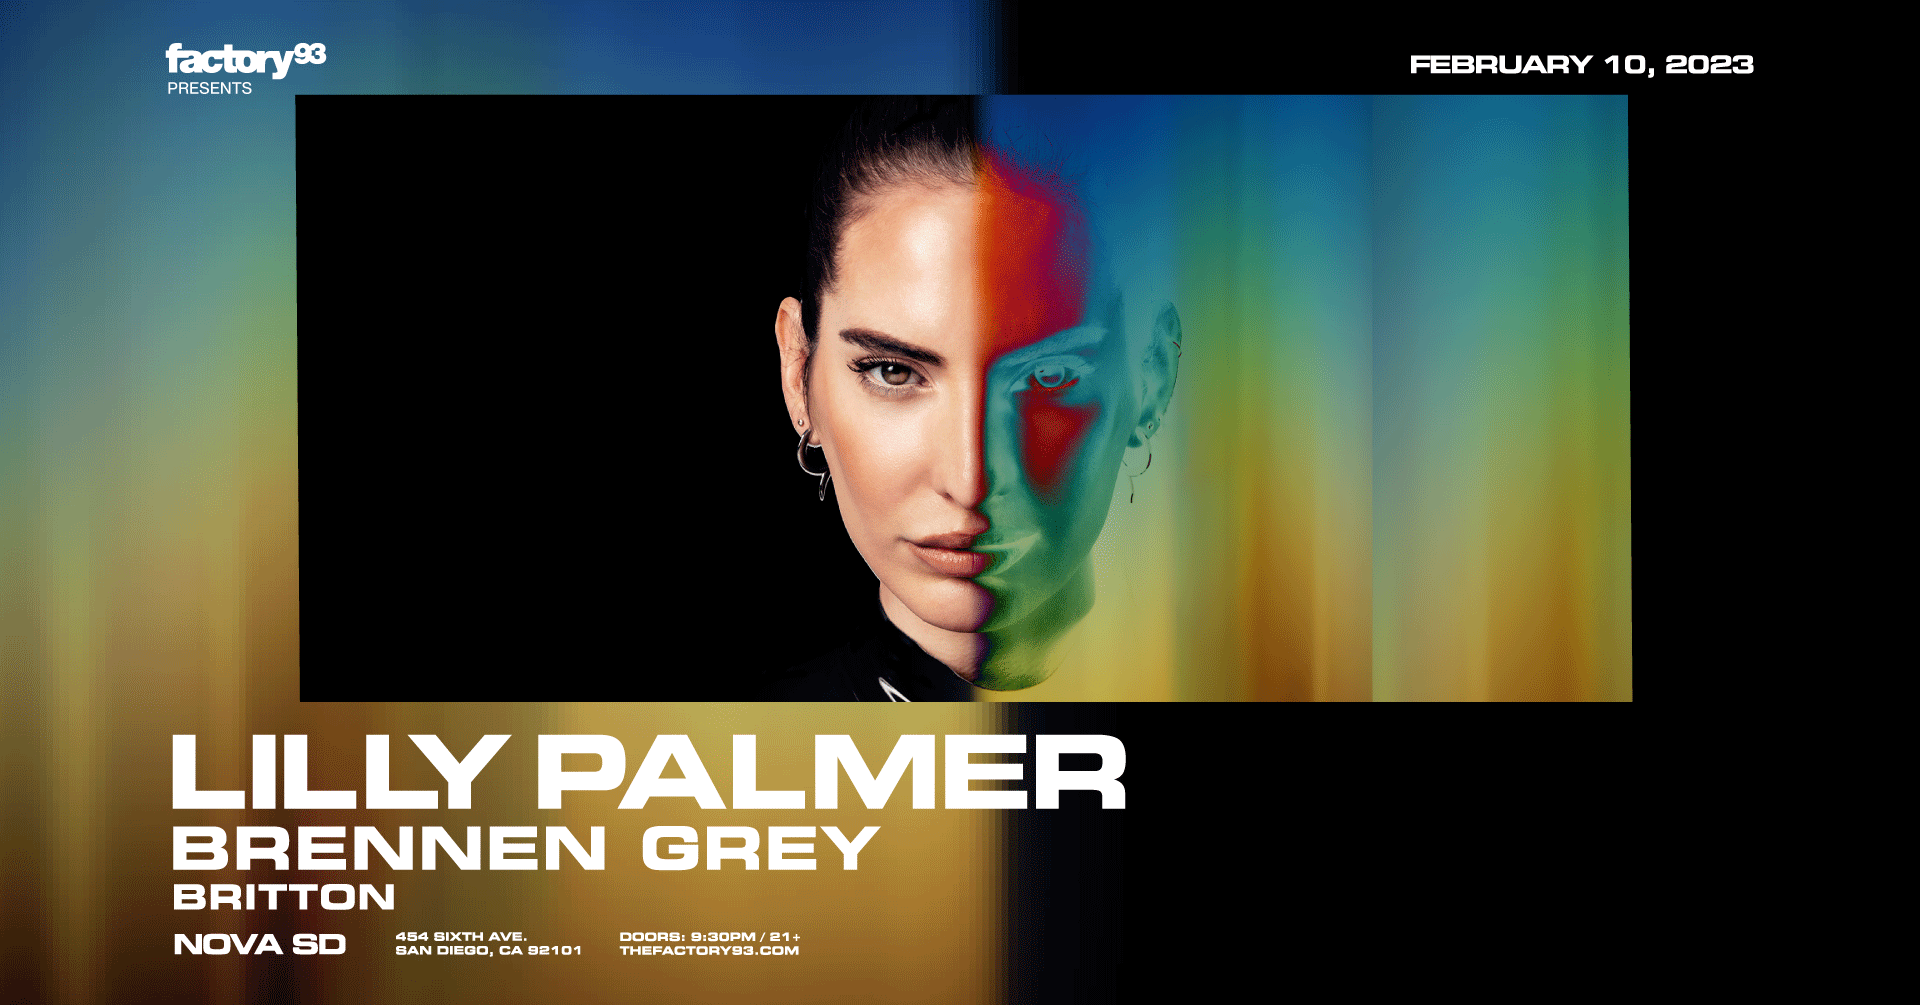 Factory 93 presents: Lilly Palmer with Brennen Grey - Página frontal